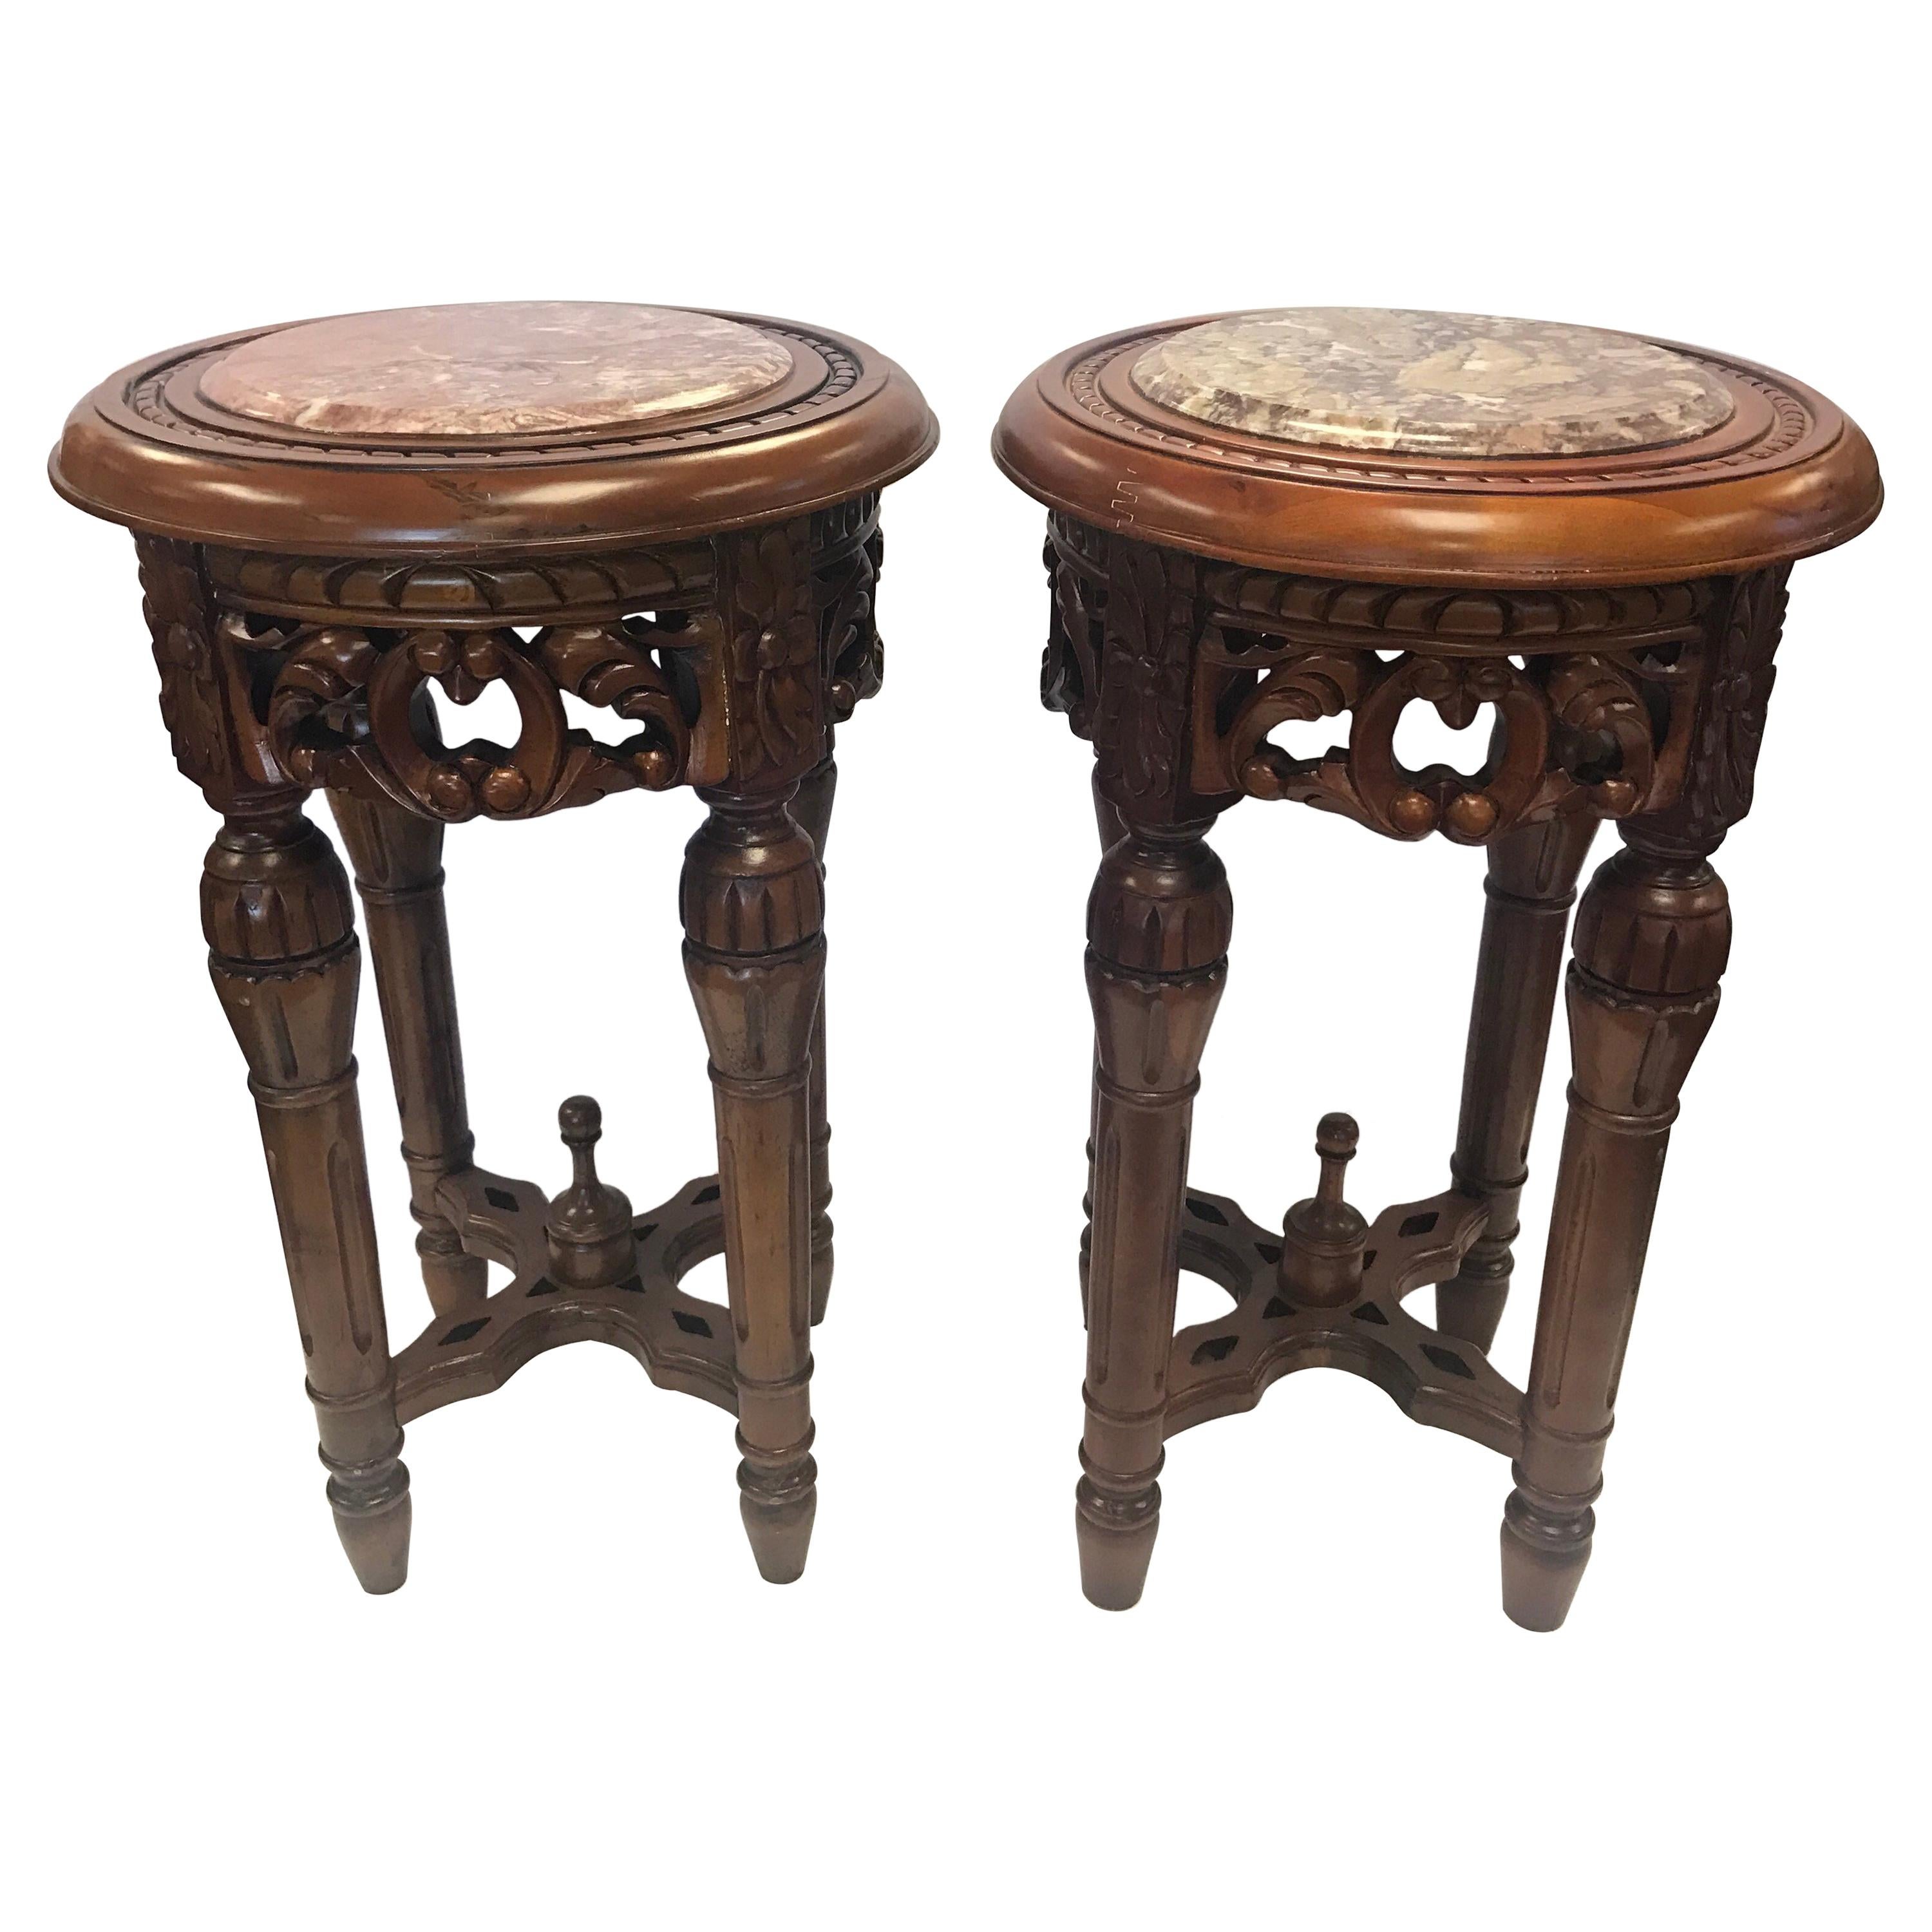 Chinese Round Carved Marble-Top Pedestal Tables Plant Stands